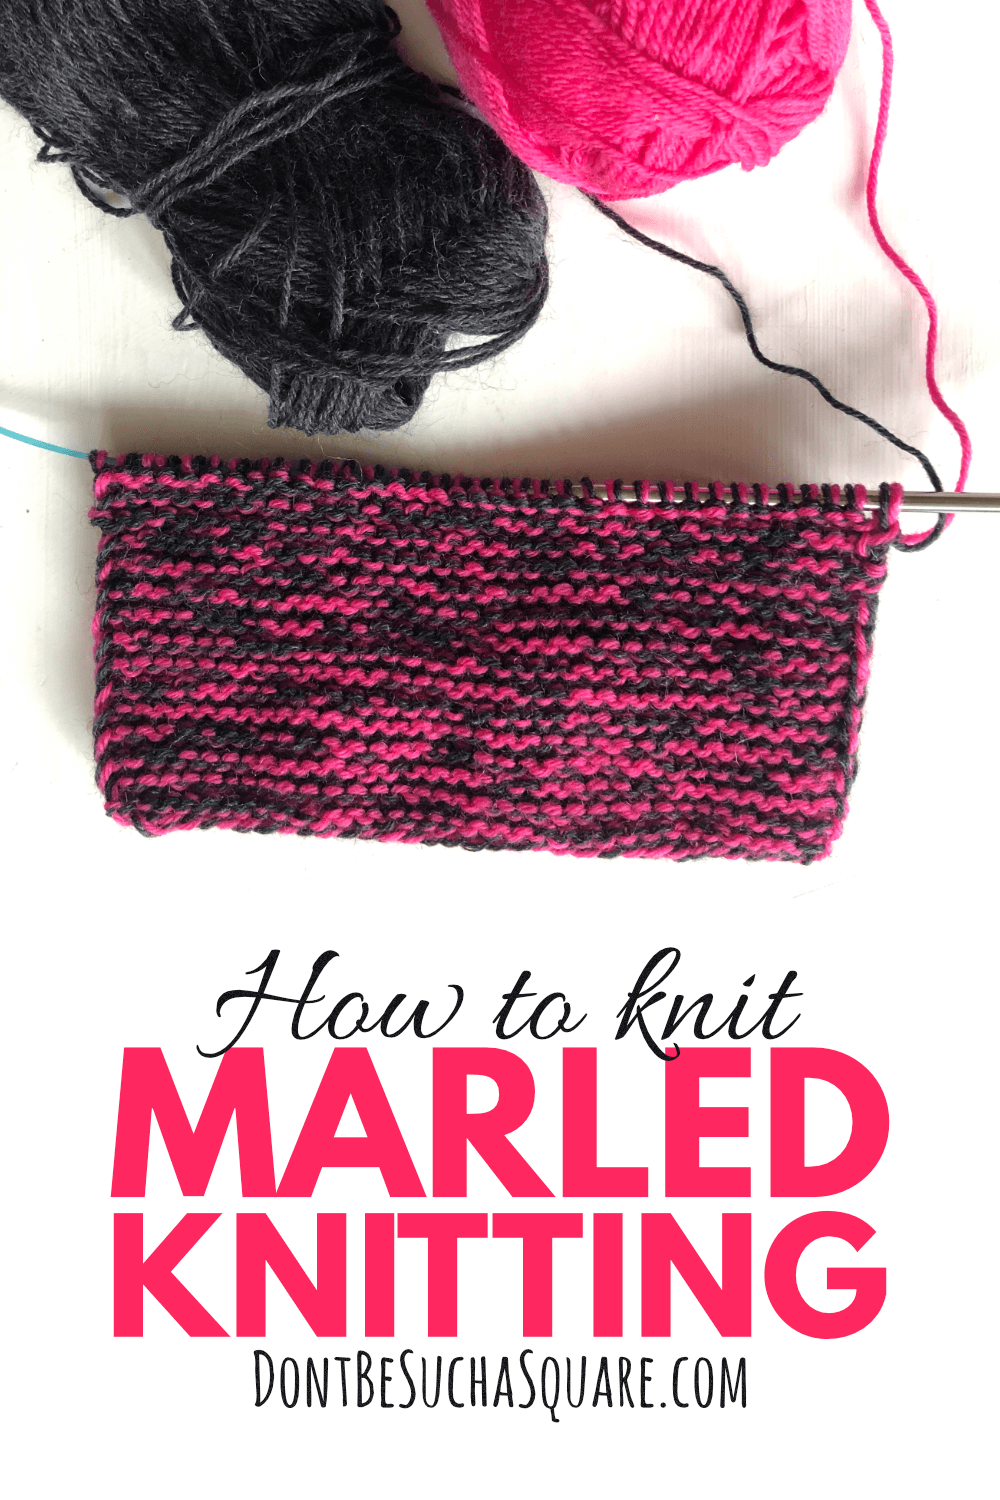 A piece of marled knitting on the needles and two balls of yarn. And the text: how to knit, marled knitting